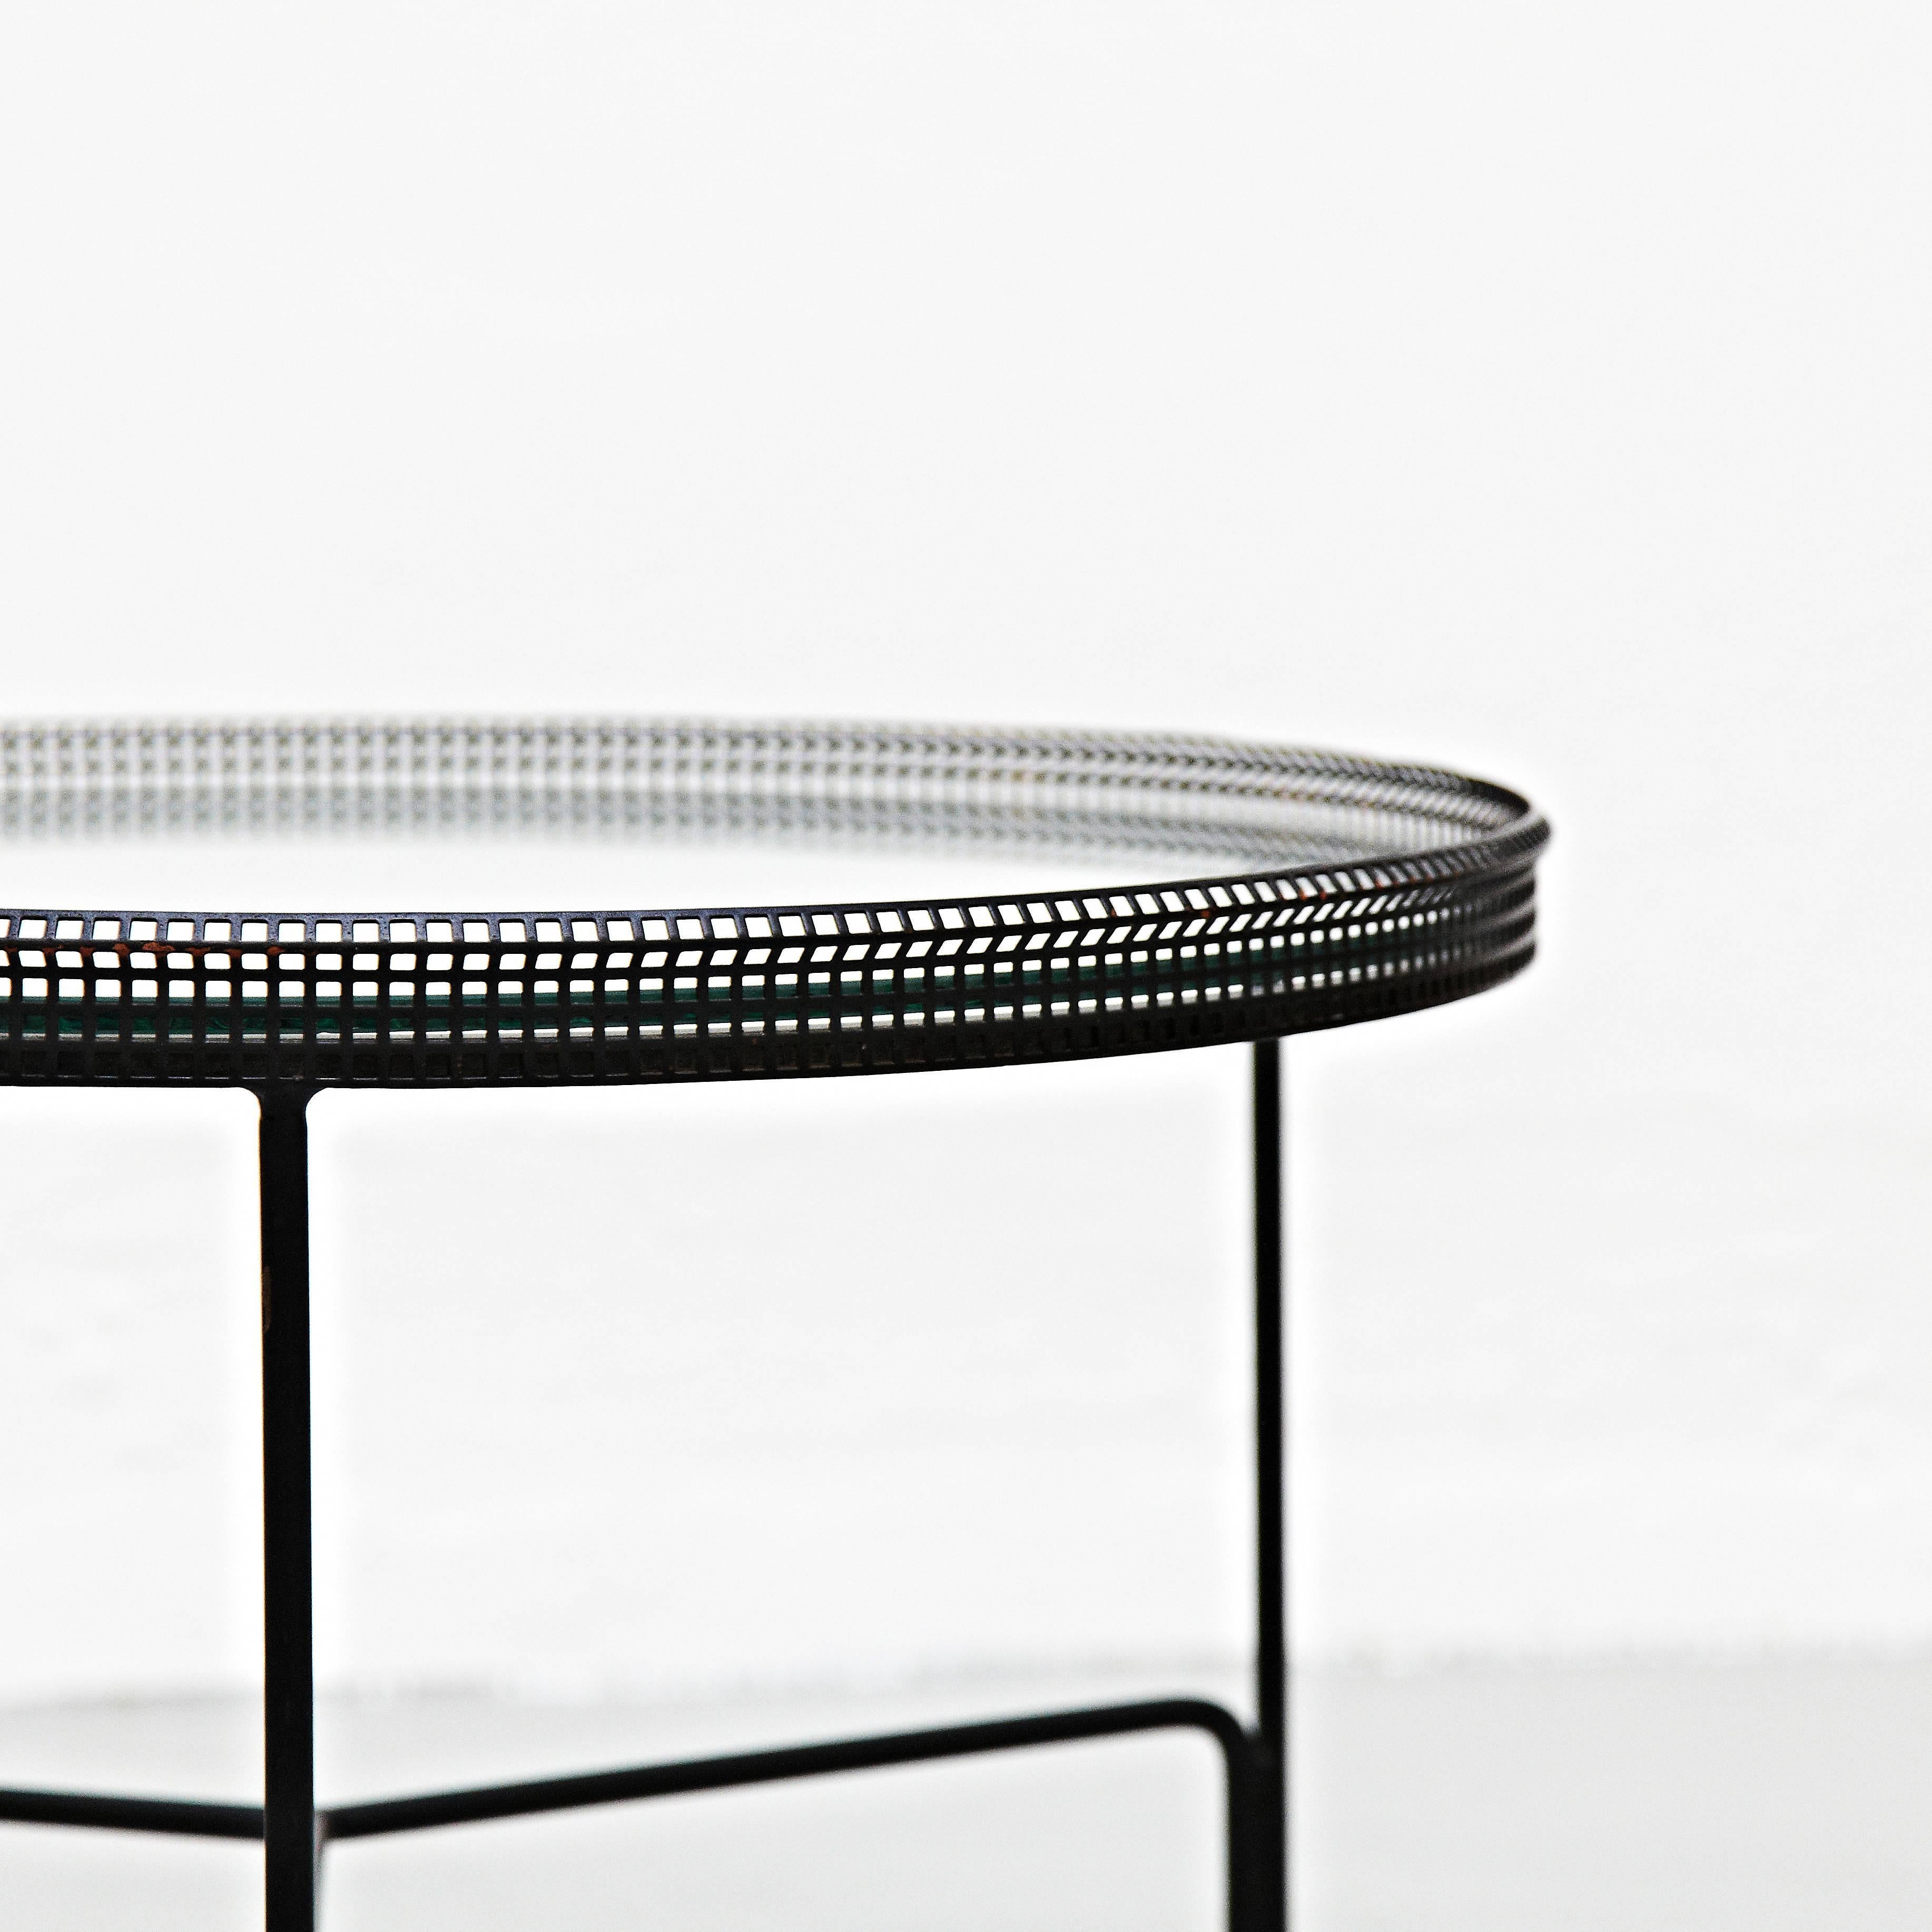 Lacquered Mathieu Matégot Mid-Century Modern Black Metal and Glass Coffee Table